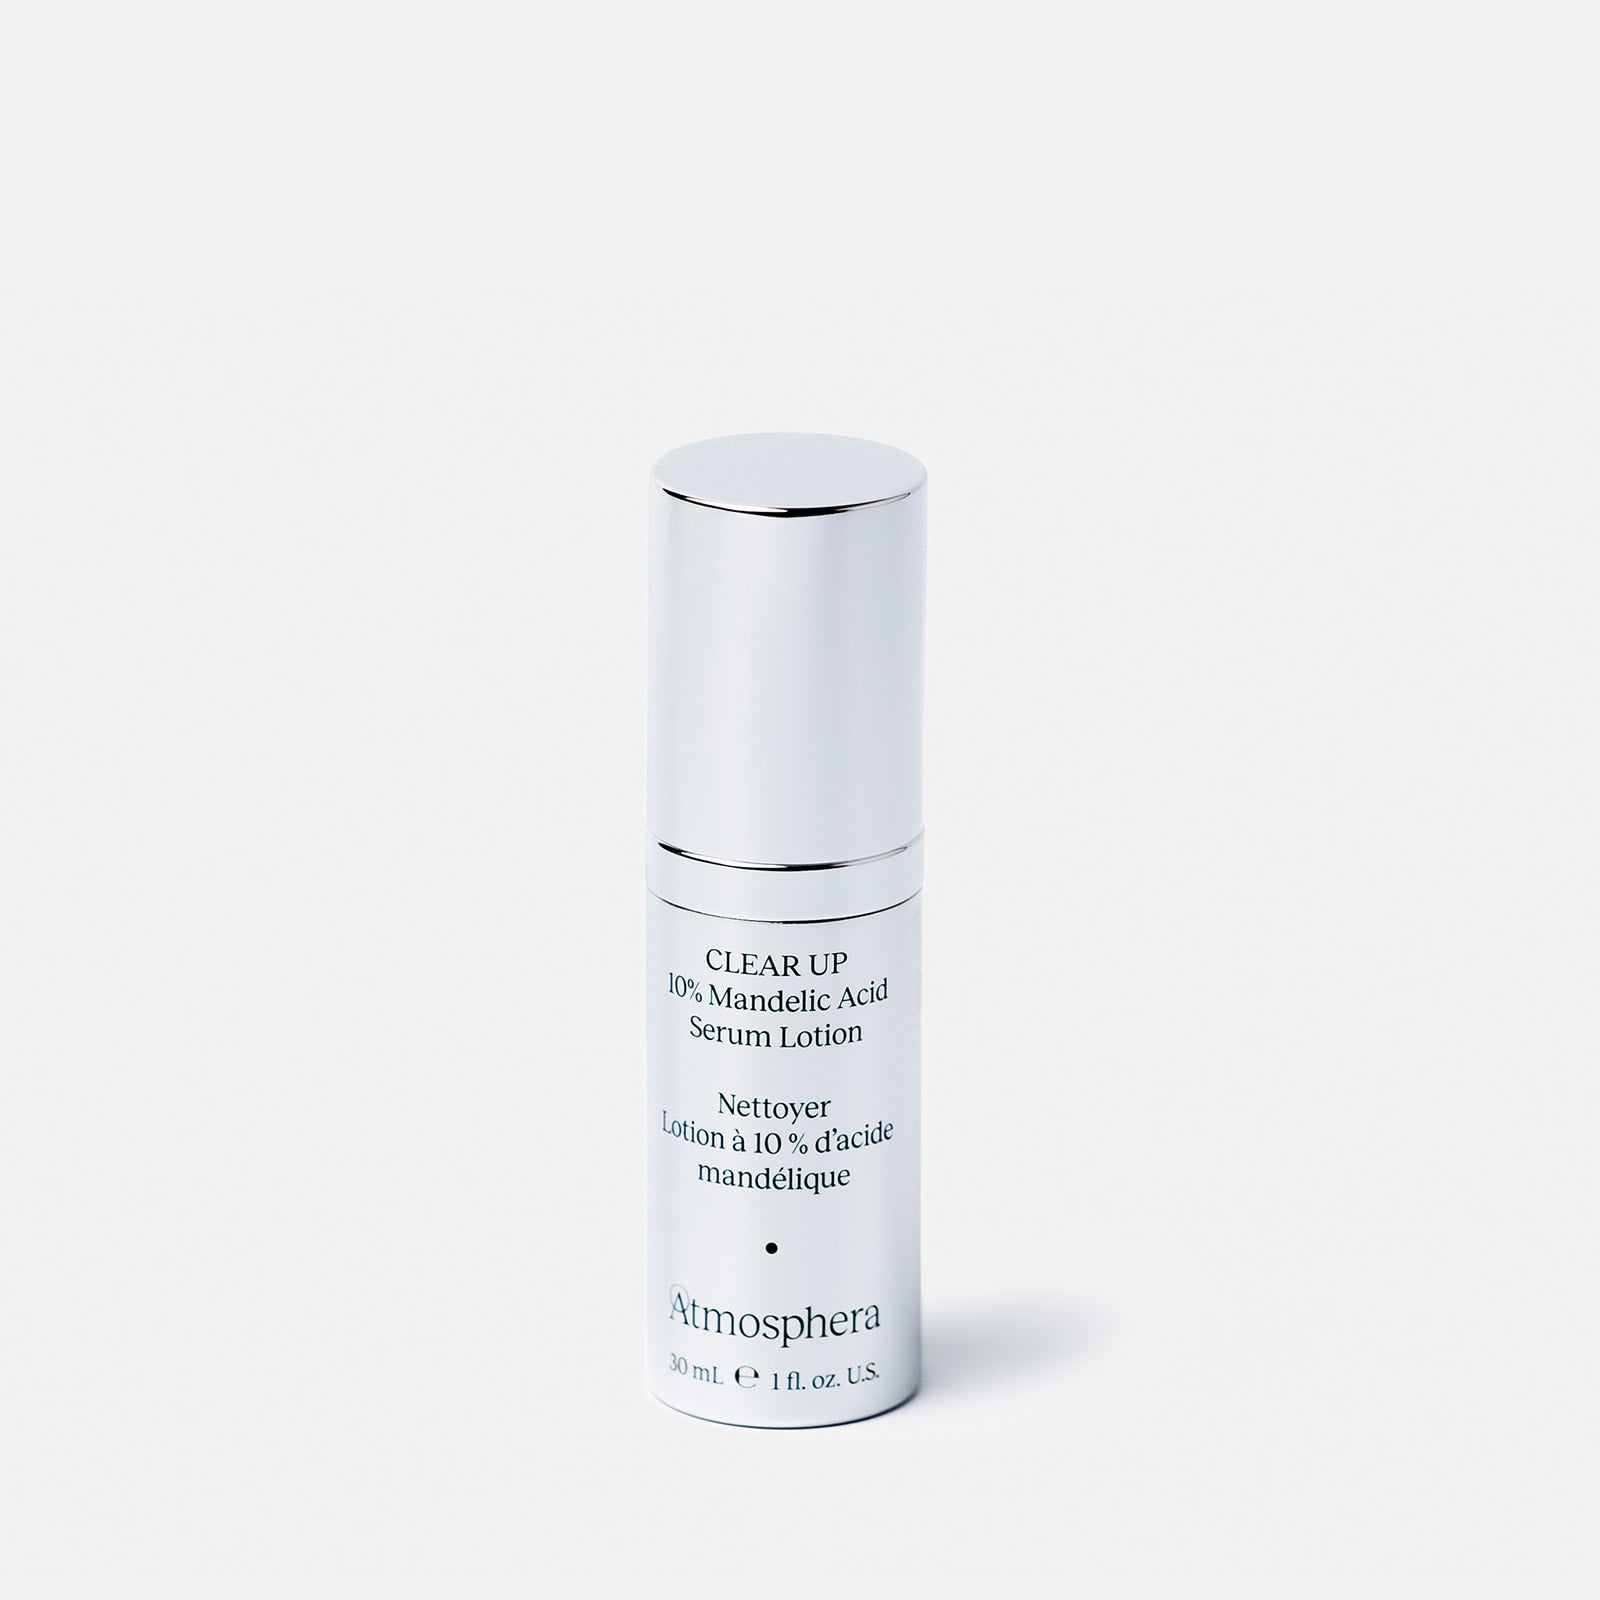 Clear Up - Clarifying Serum with 10% Mandelic + Lactic Acid